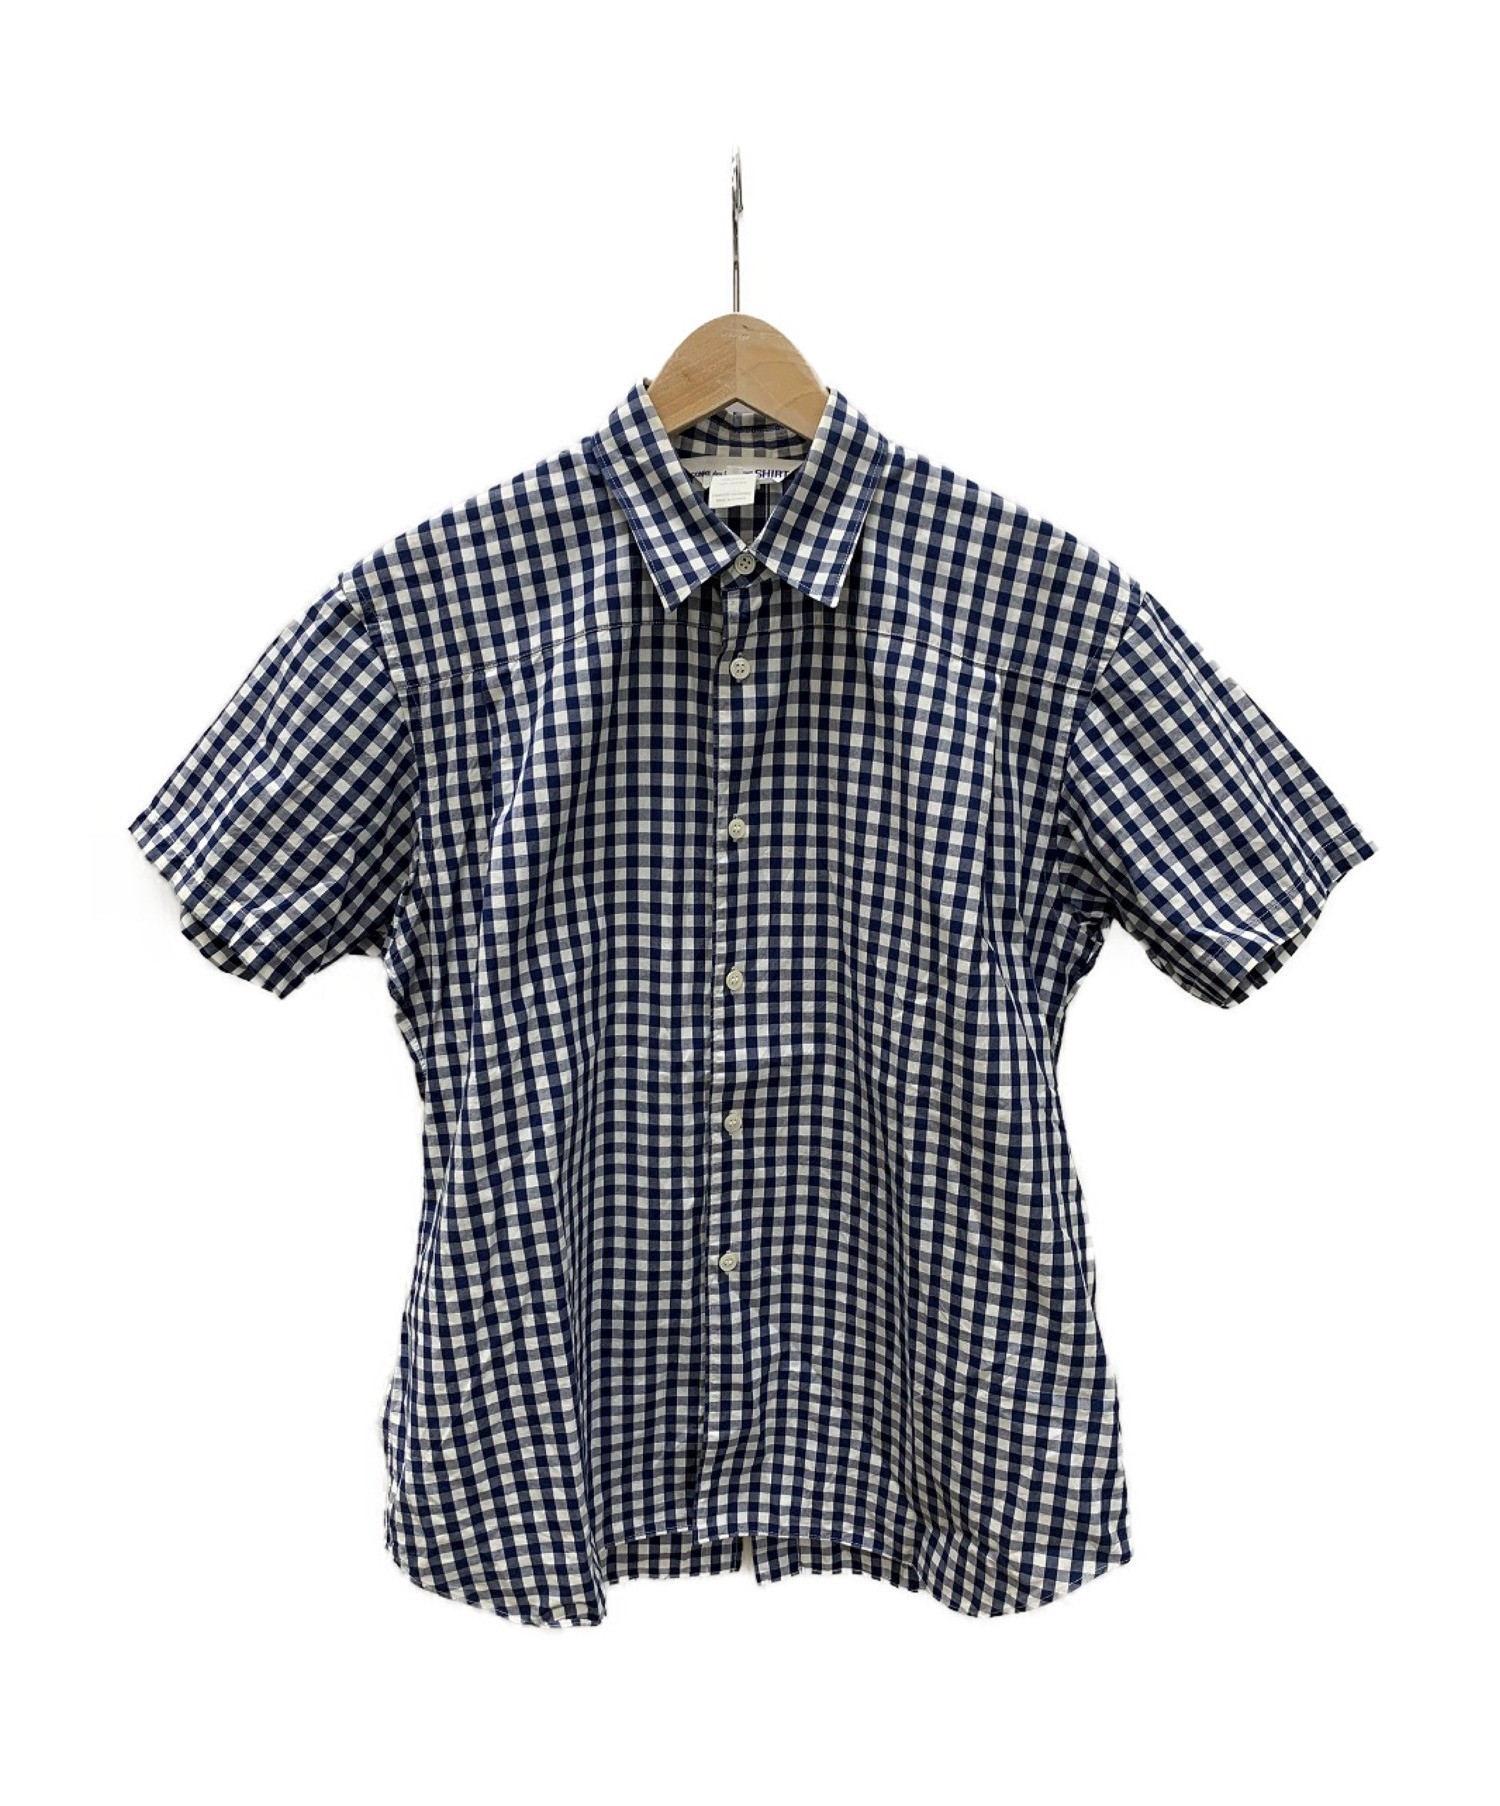 COMME des GARCONS SHIRT ギンガムチェック 半袖シャツ | kinderpartys.at